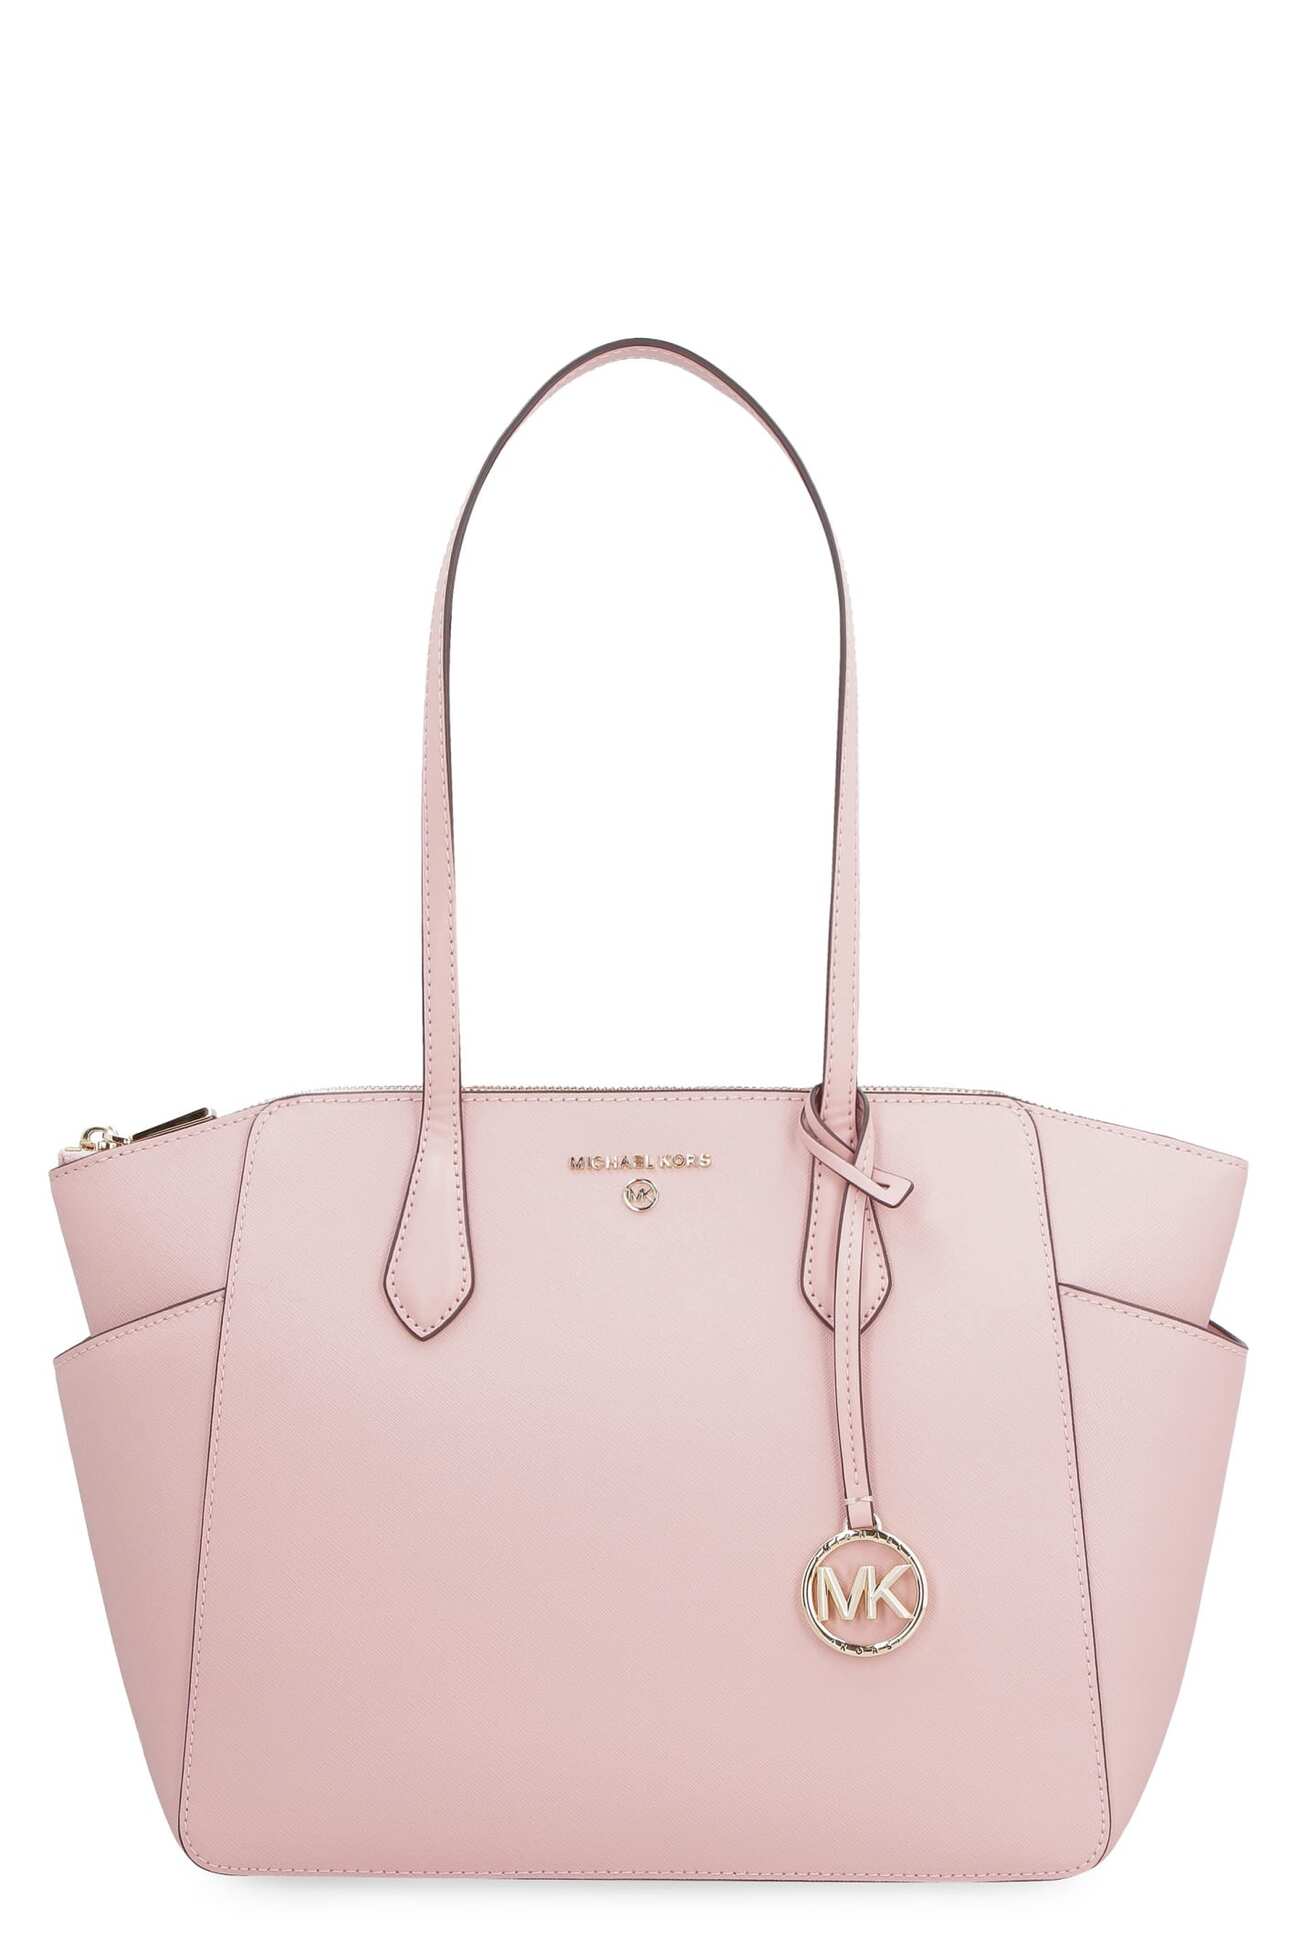 Michael Kors Marilyn Leather Tote in rose